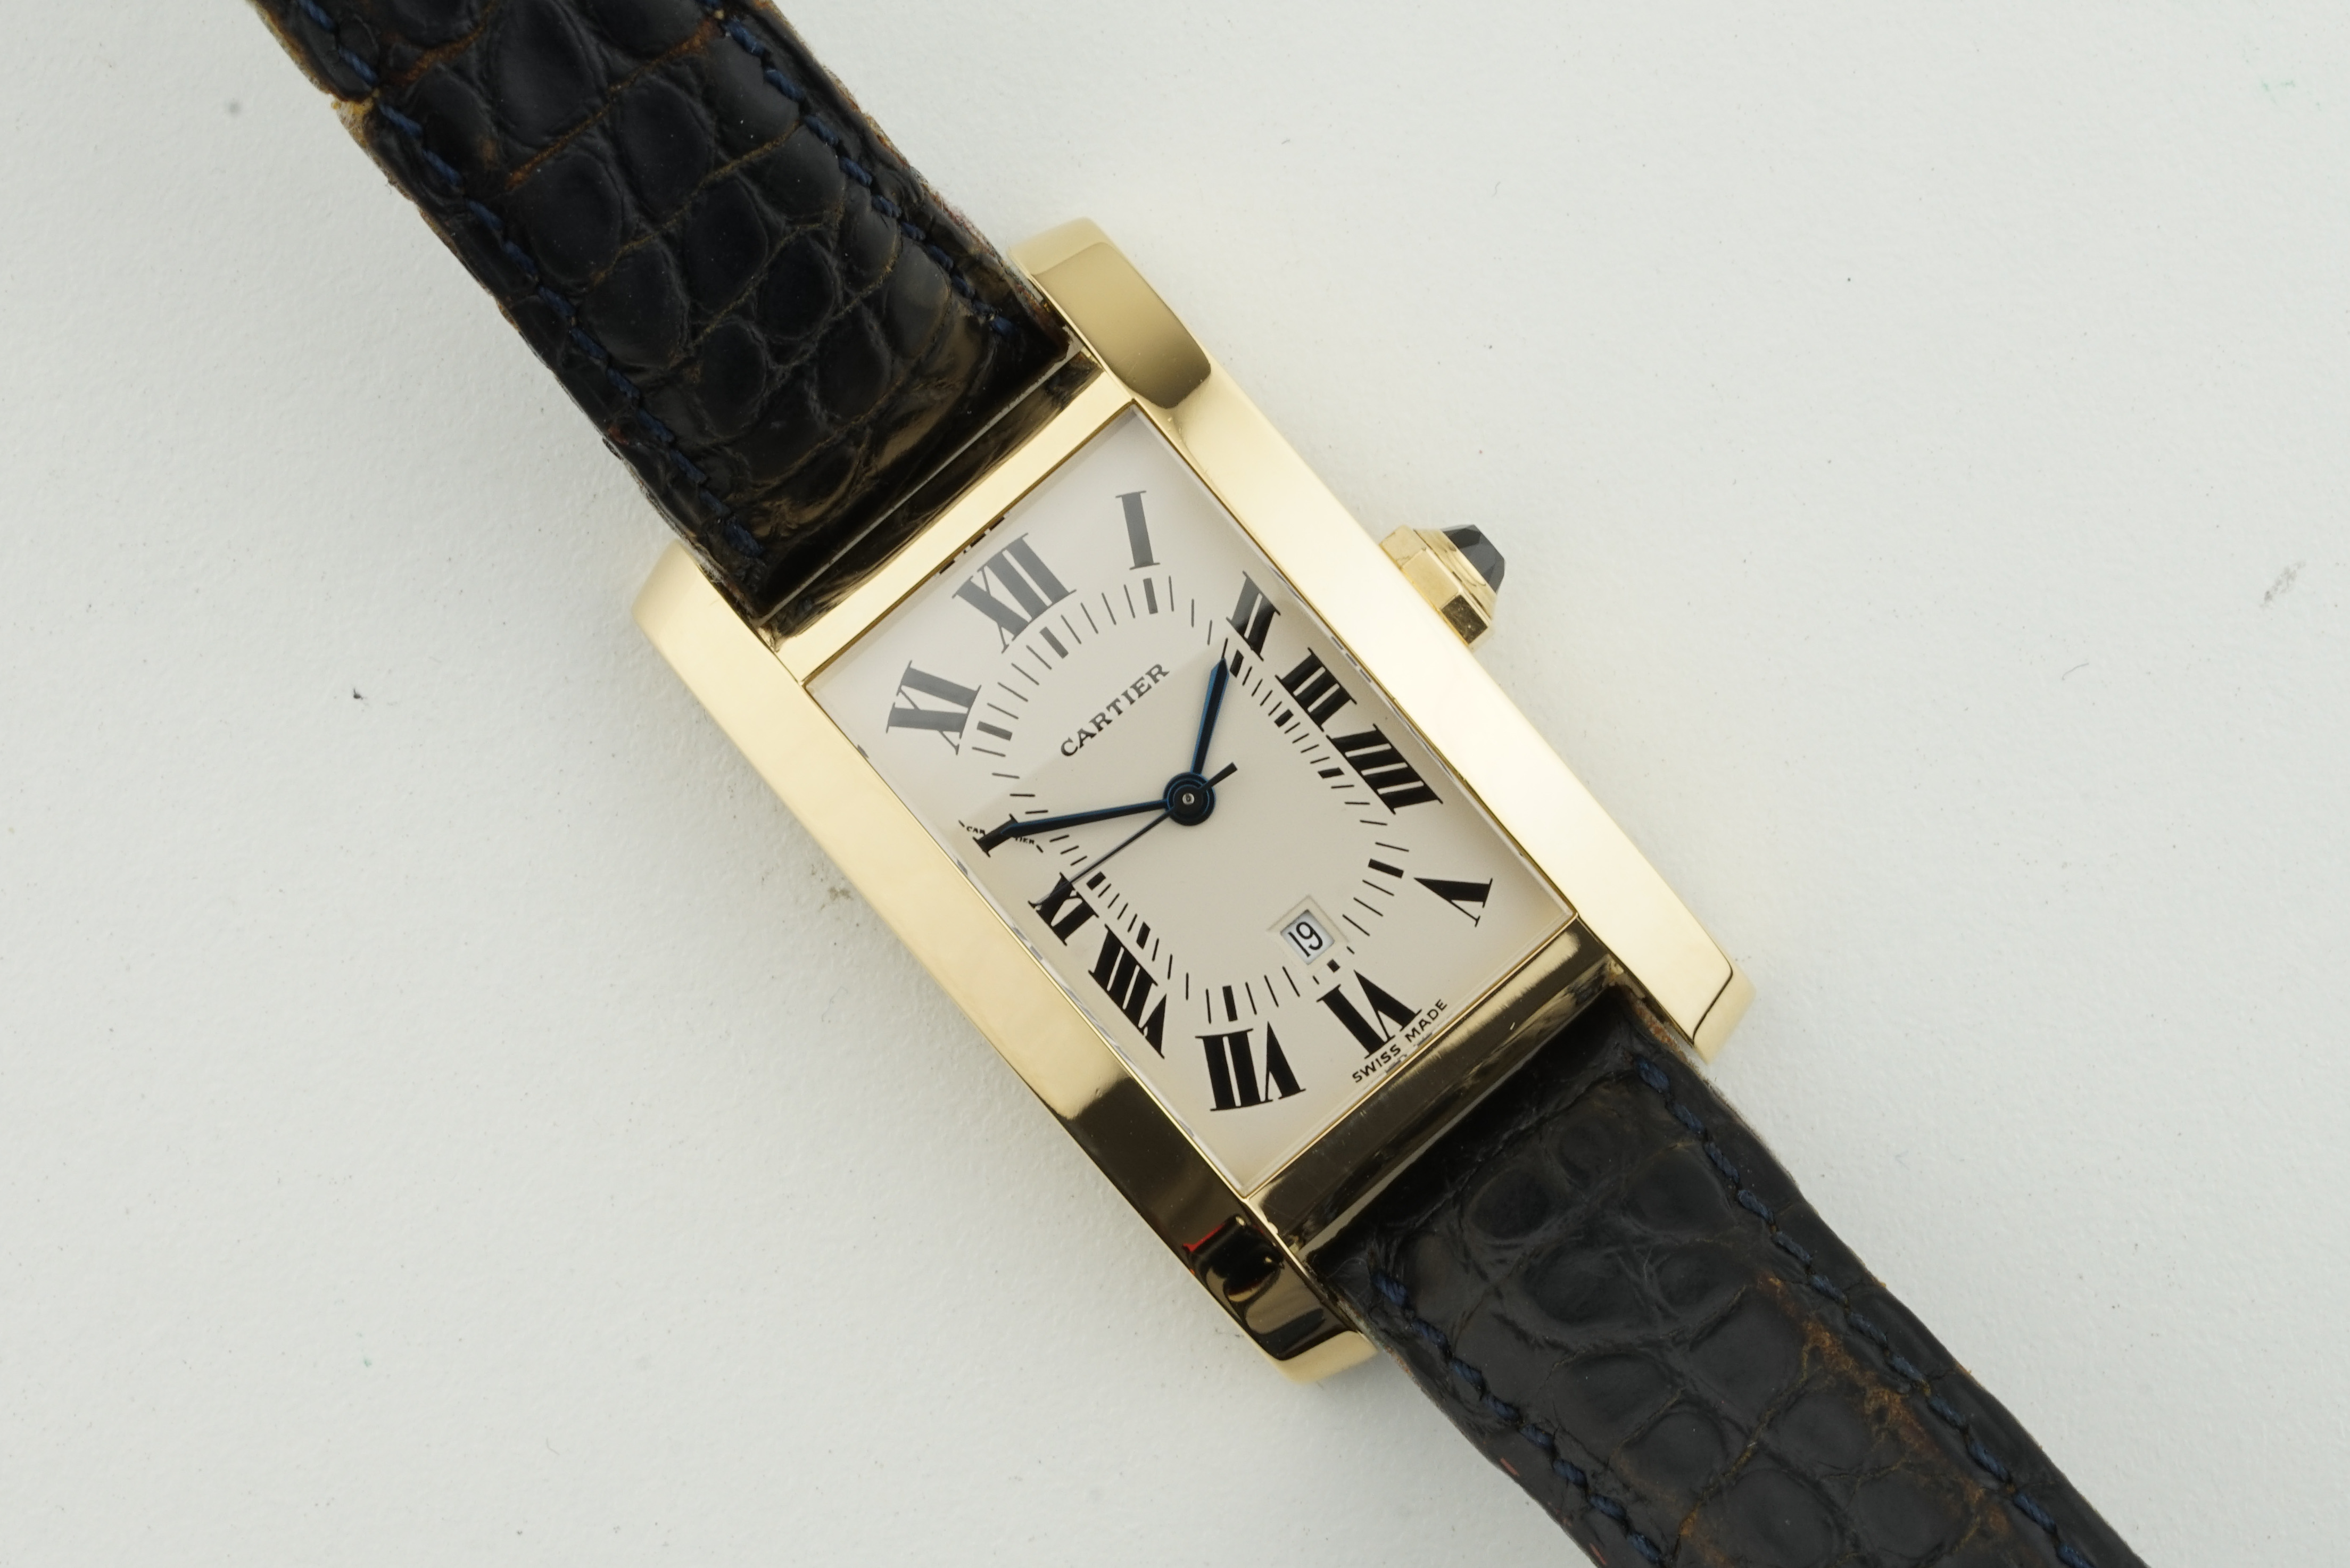 CARTIER TANK AMERICAINE 18CT GOLD PARIS EDITION REF. 8172, rectangular dial with hour markers and